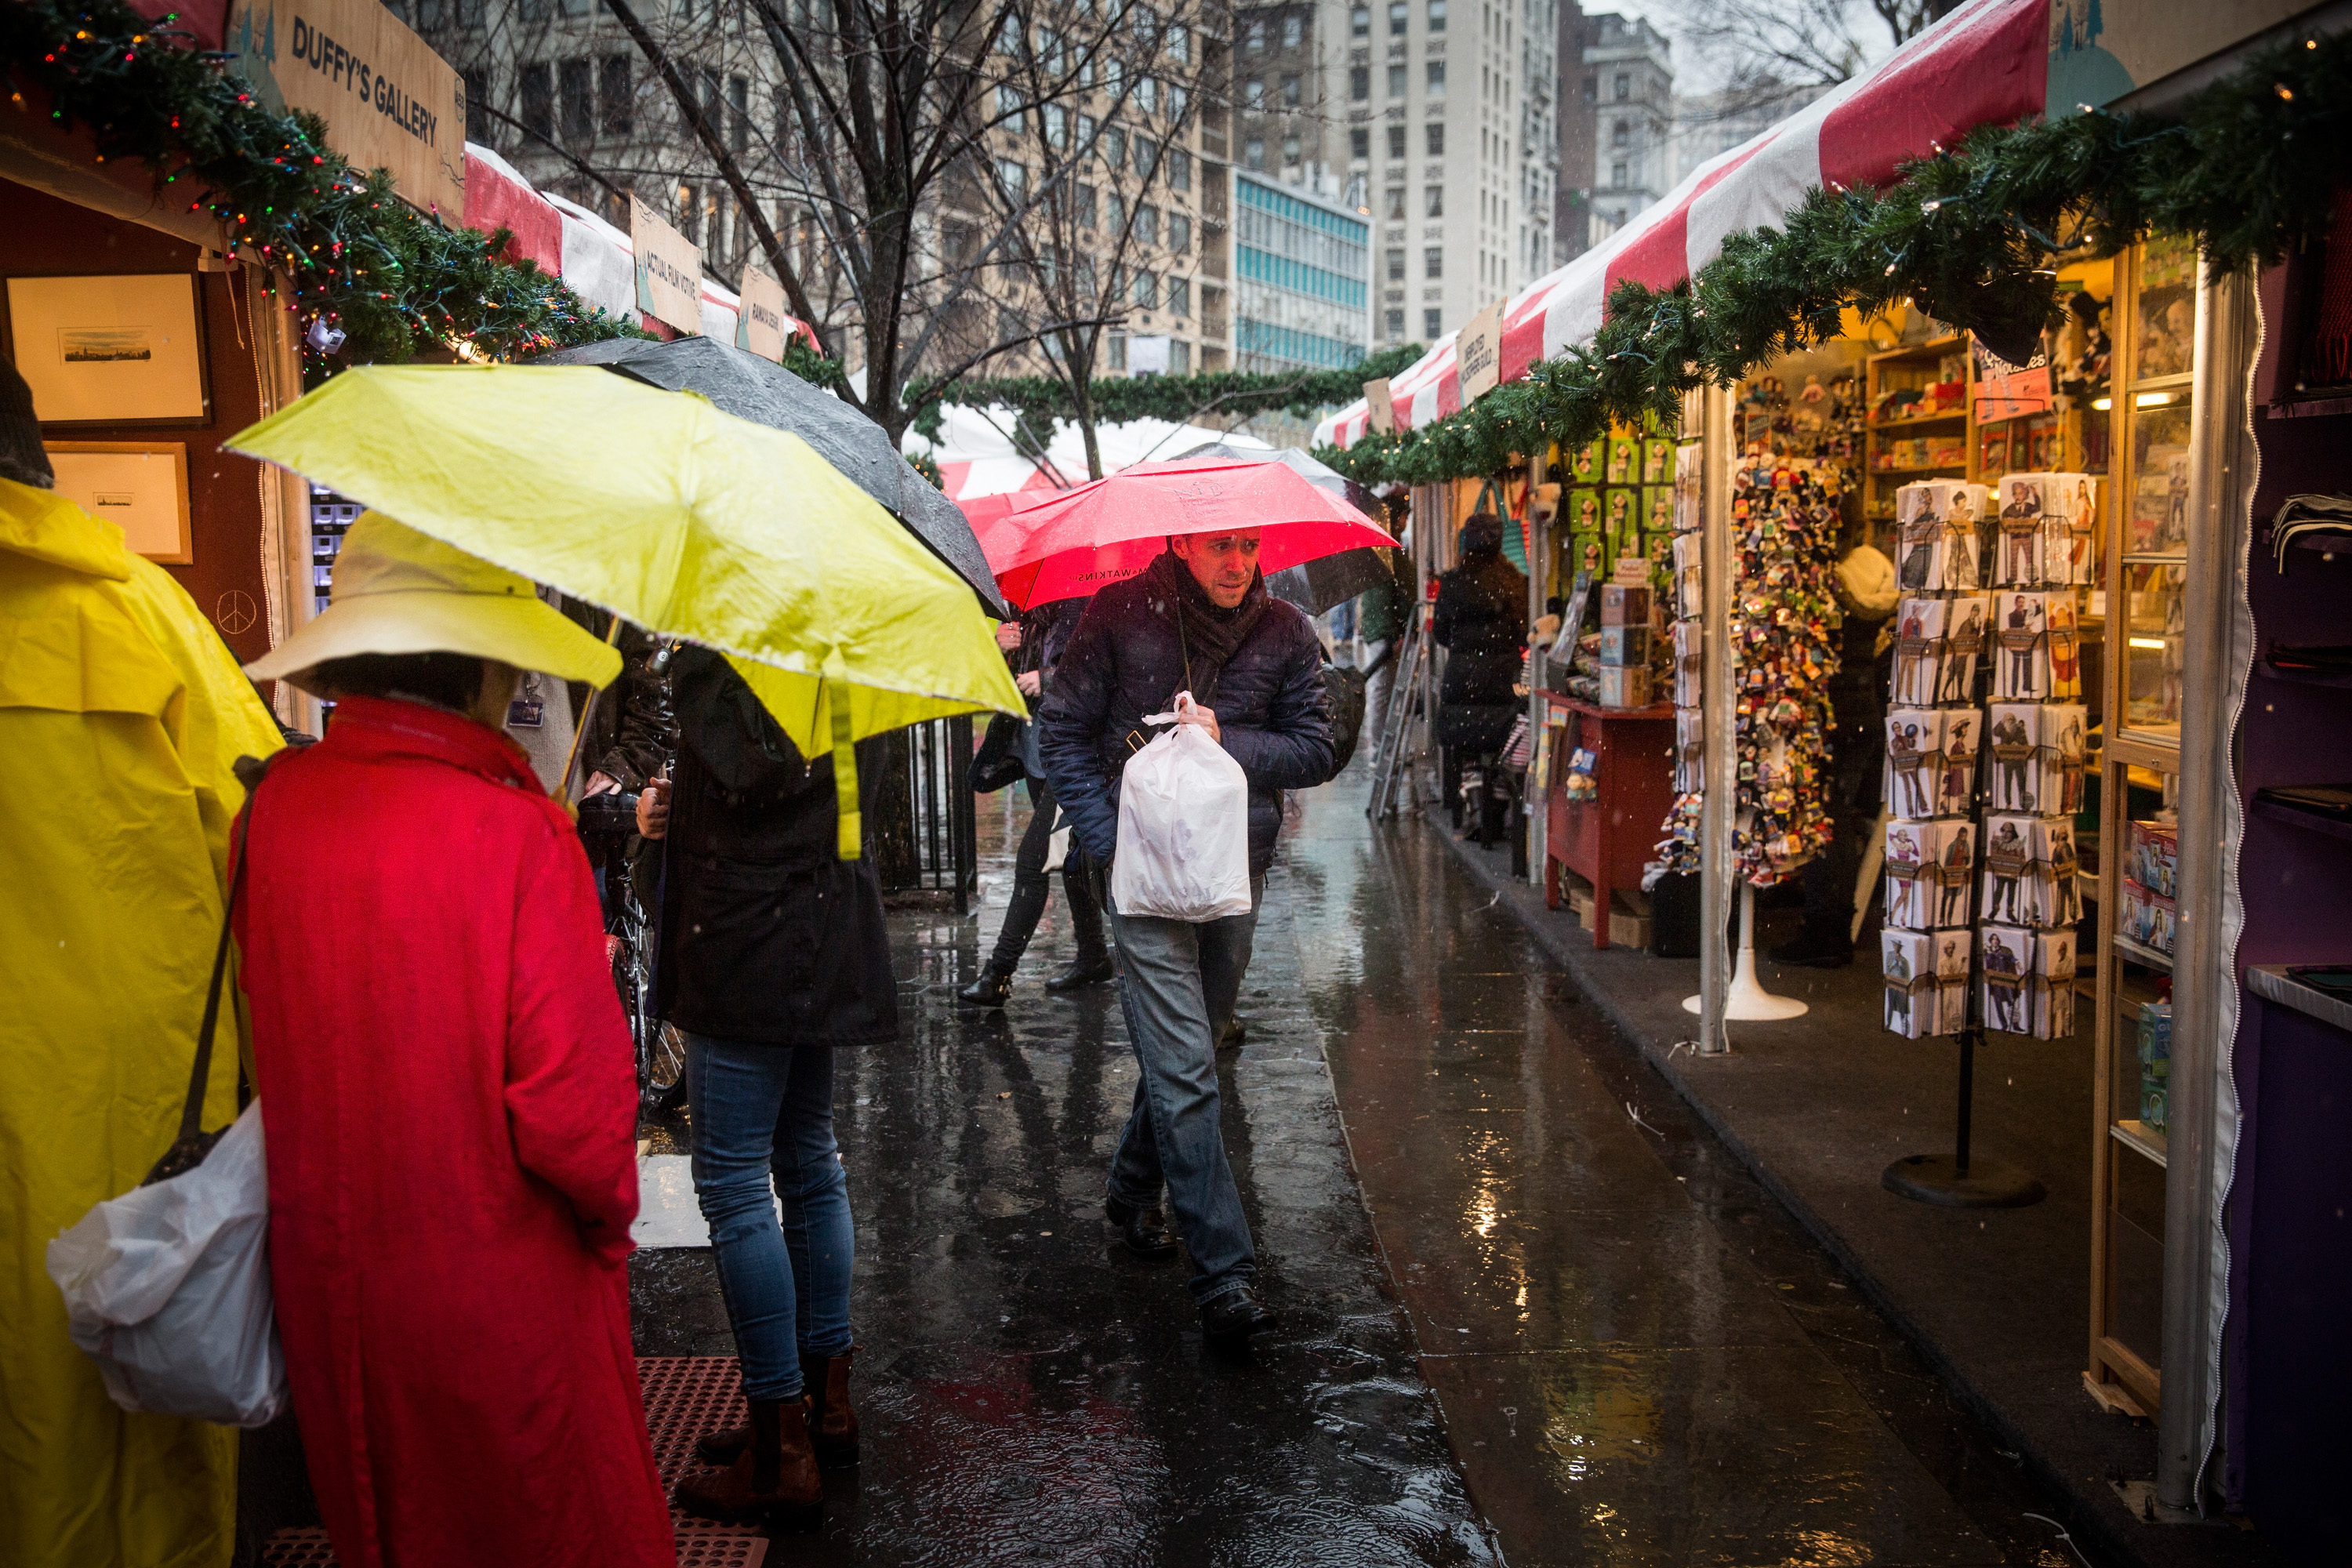 Union Square's open-air holiday market in the rain on Christmas Eve